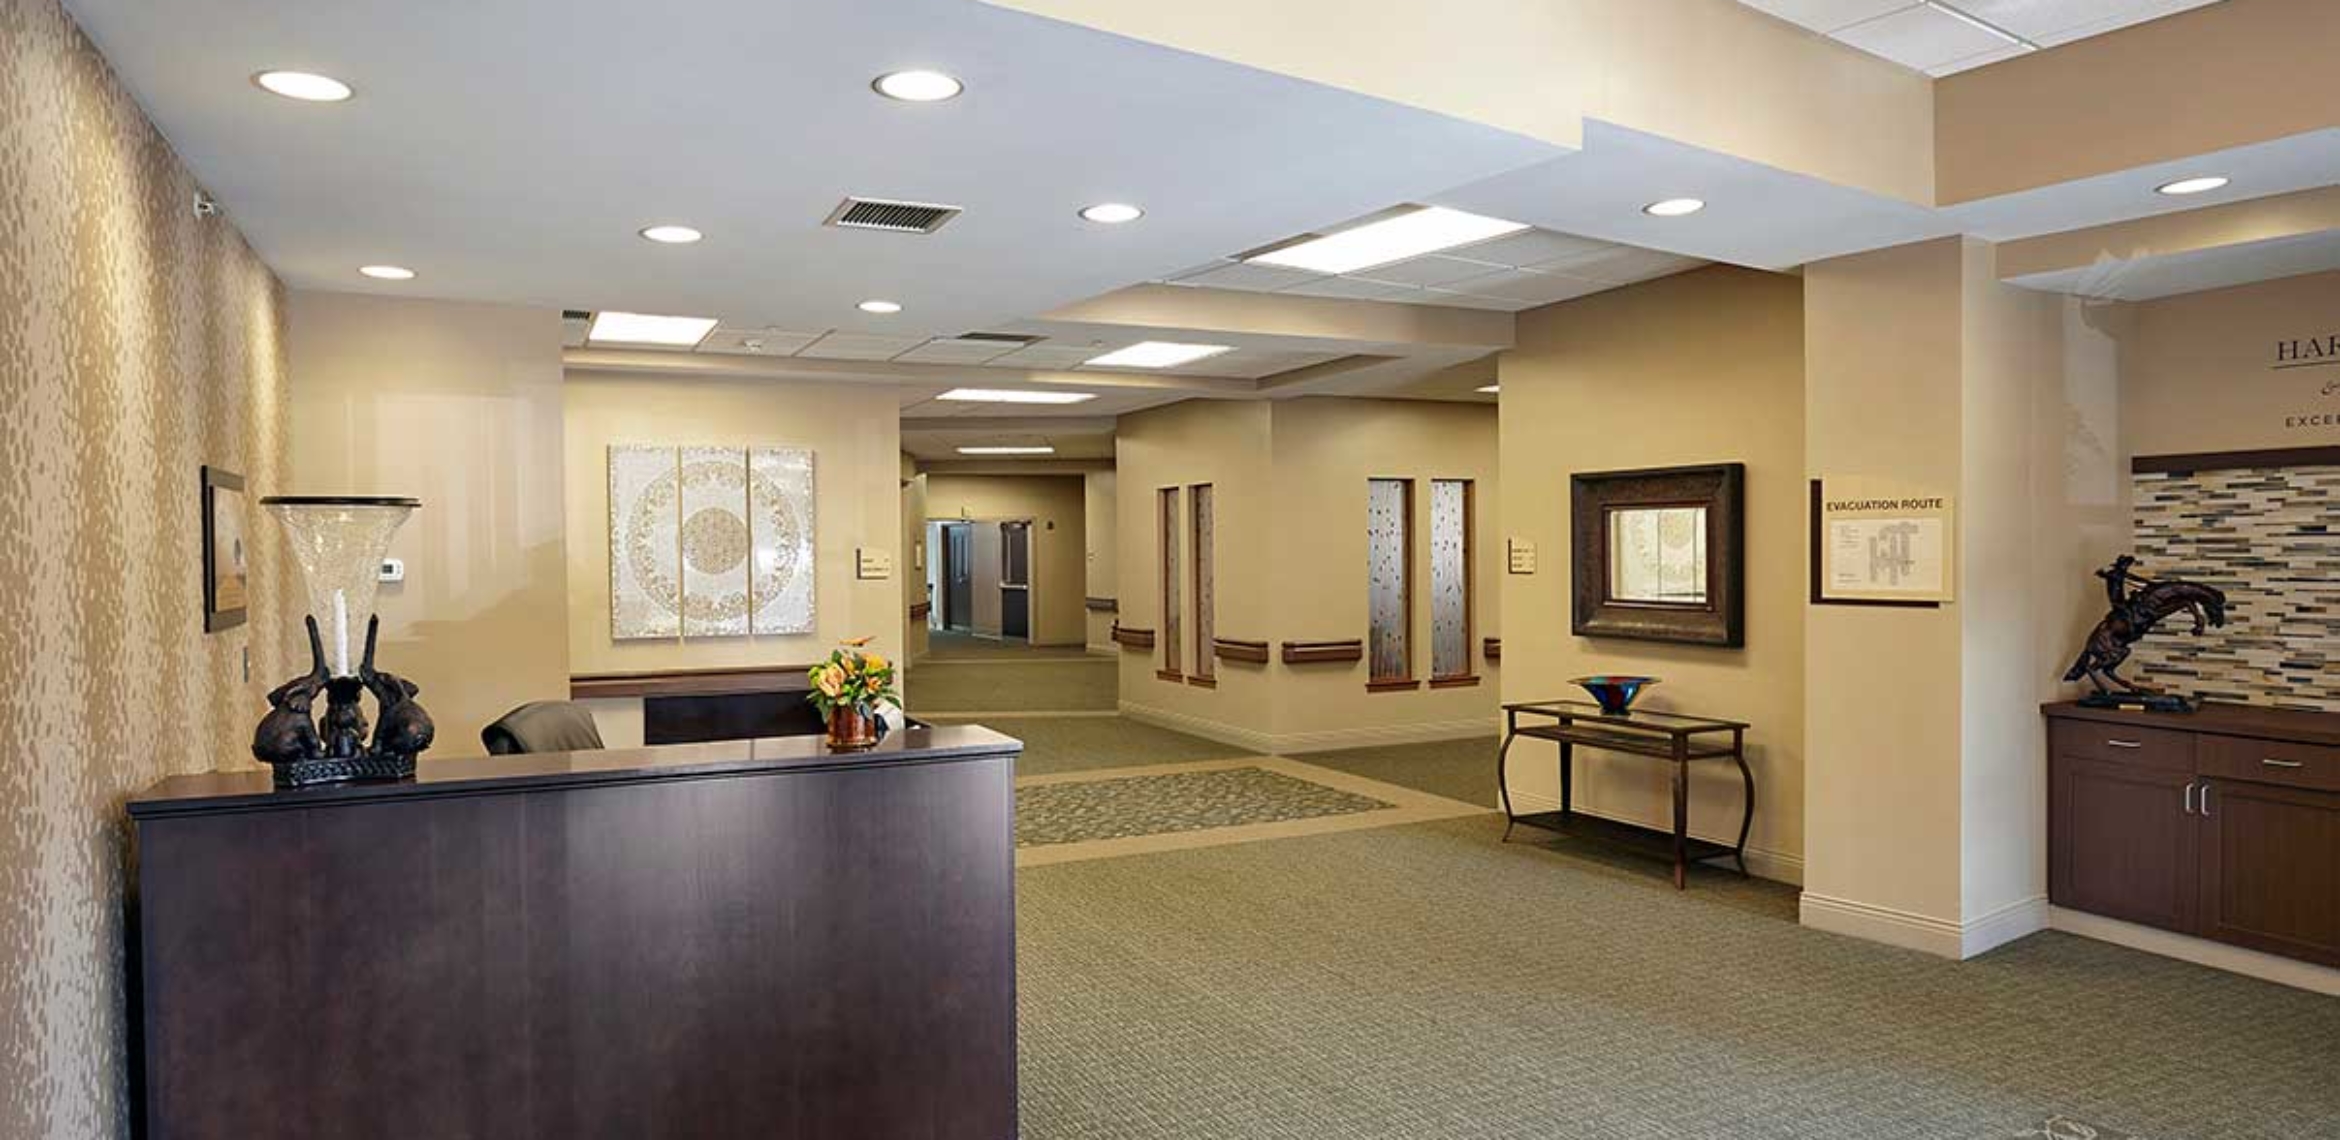 Senior Living | Harbour Manor & The Lodge | Noblesville, Indiana